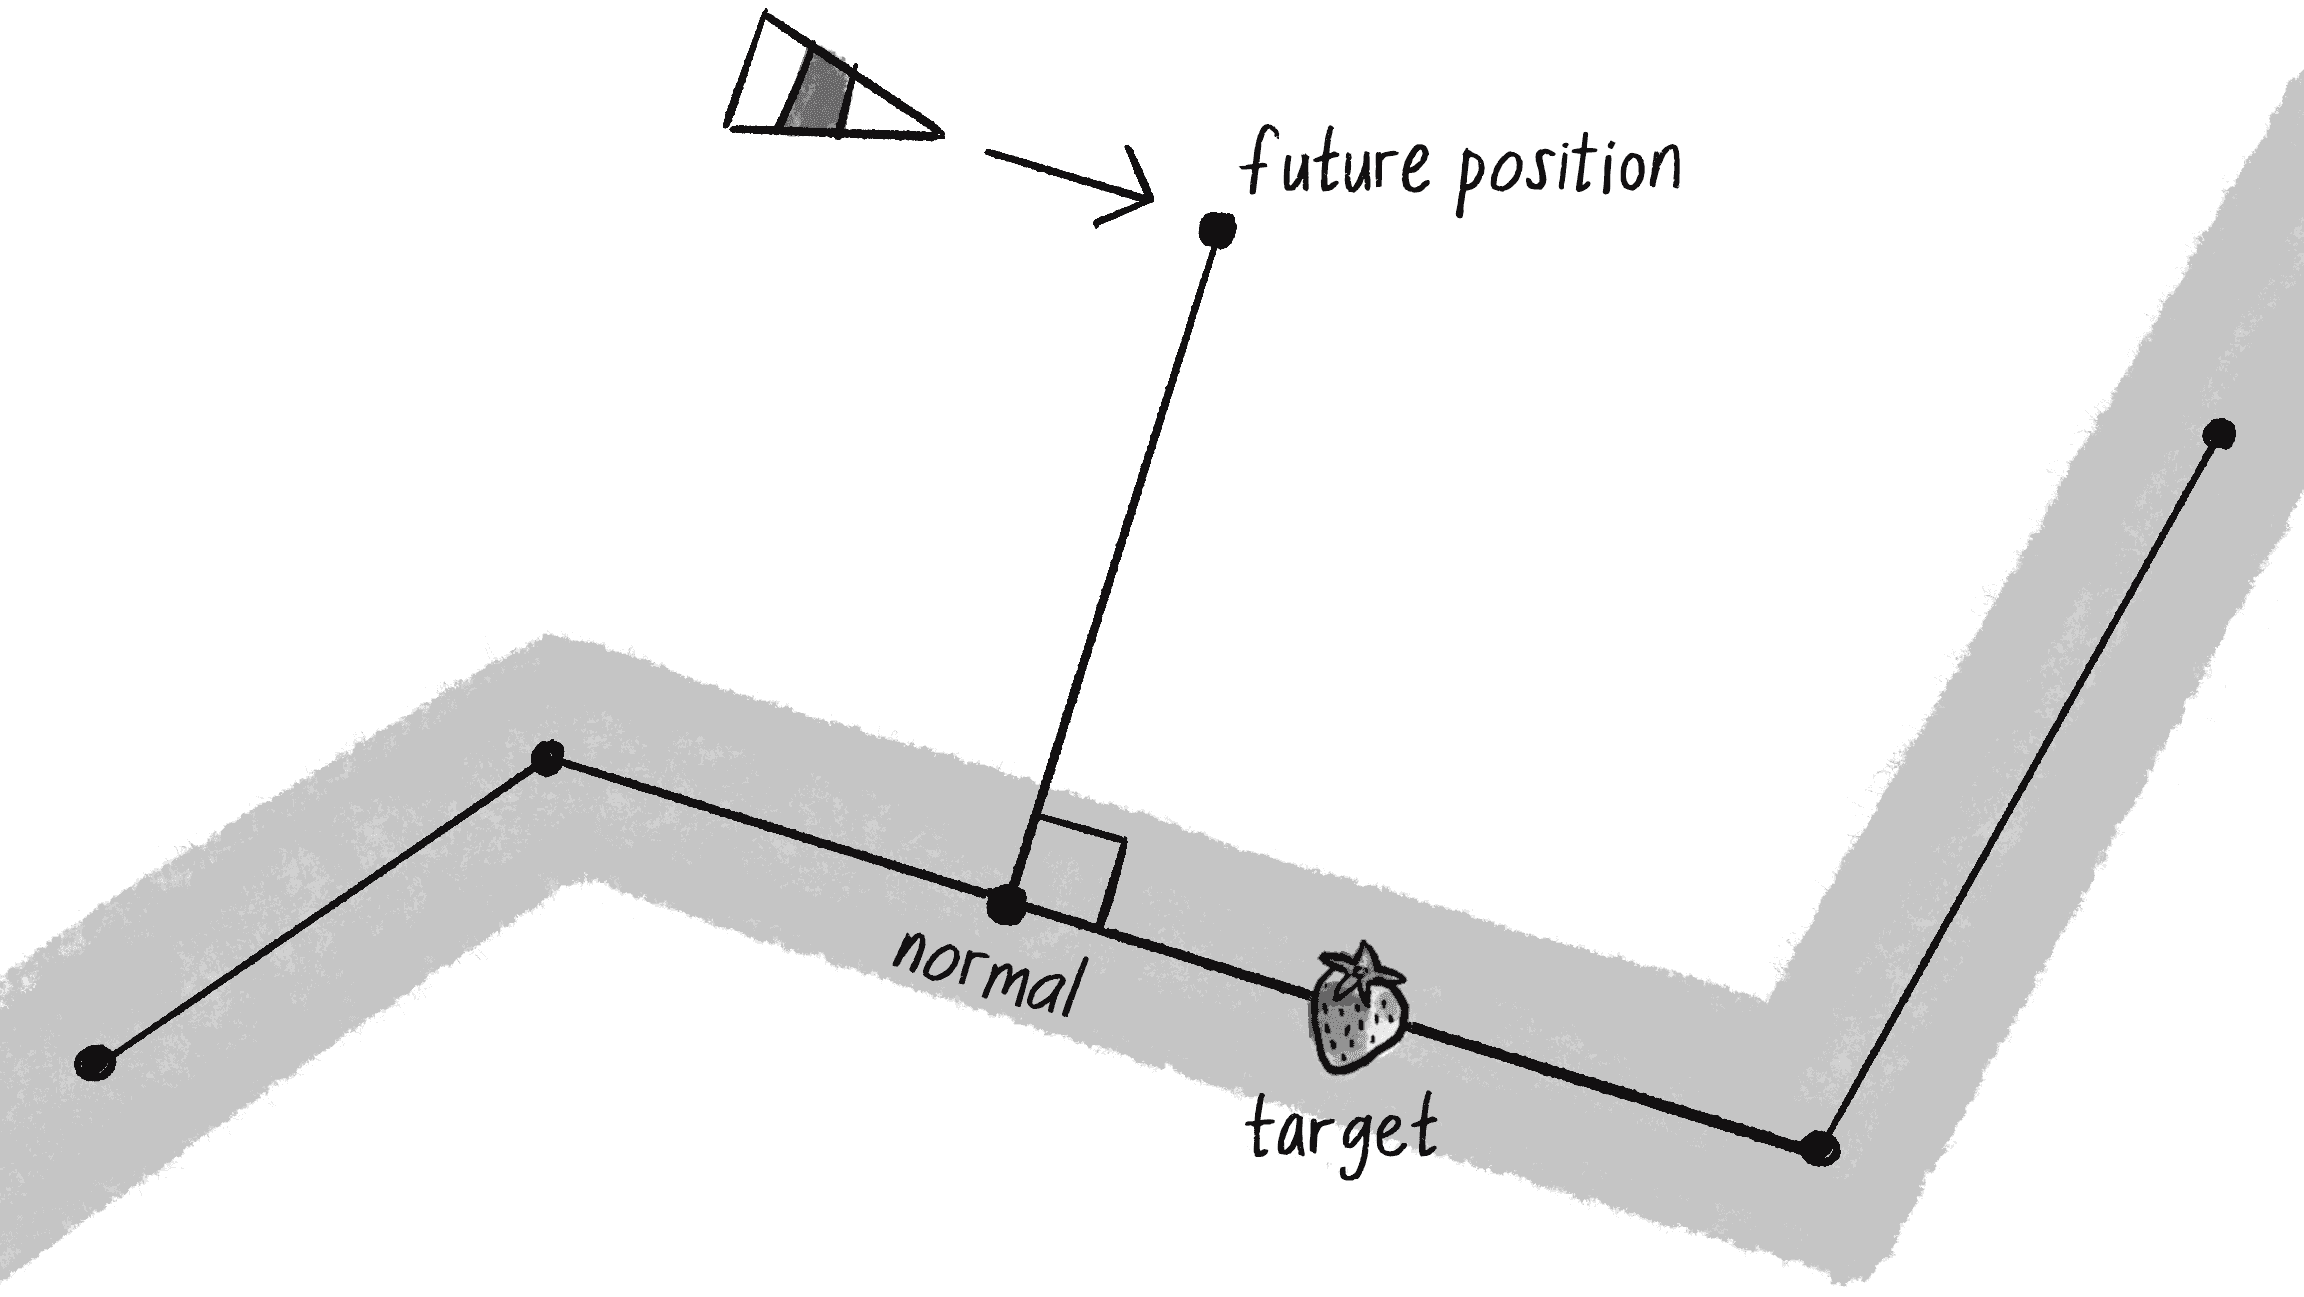 Figure 5.19: Path following requires a path, a vehicle, a future position, a normal to the path, and a target.